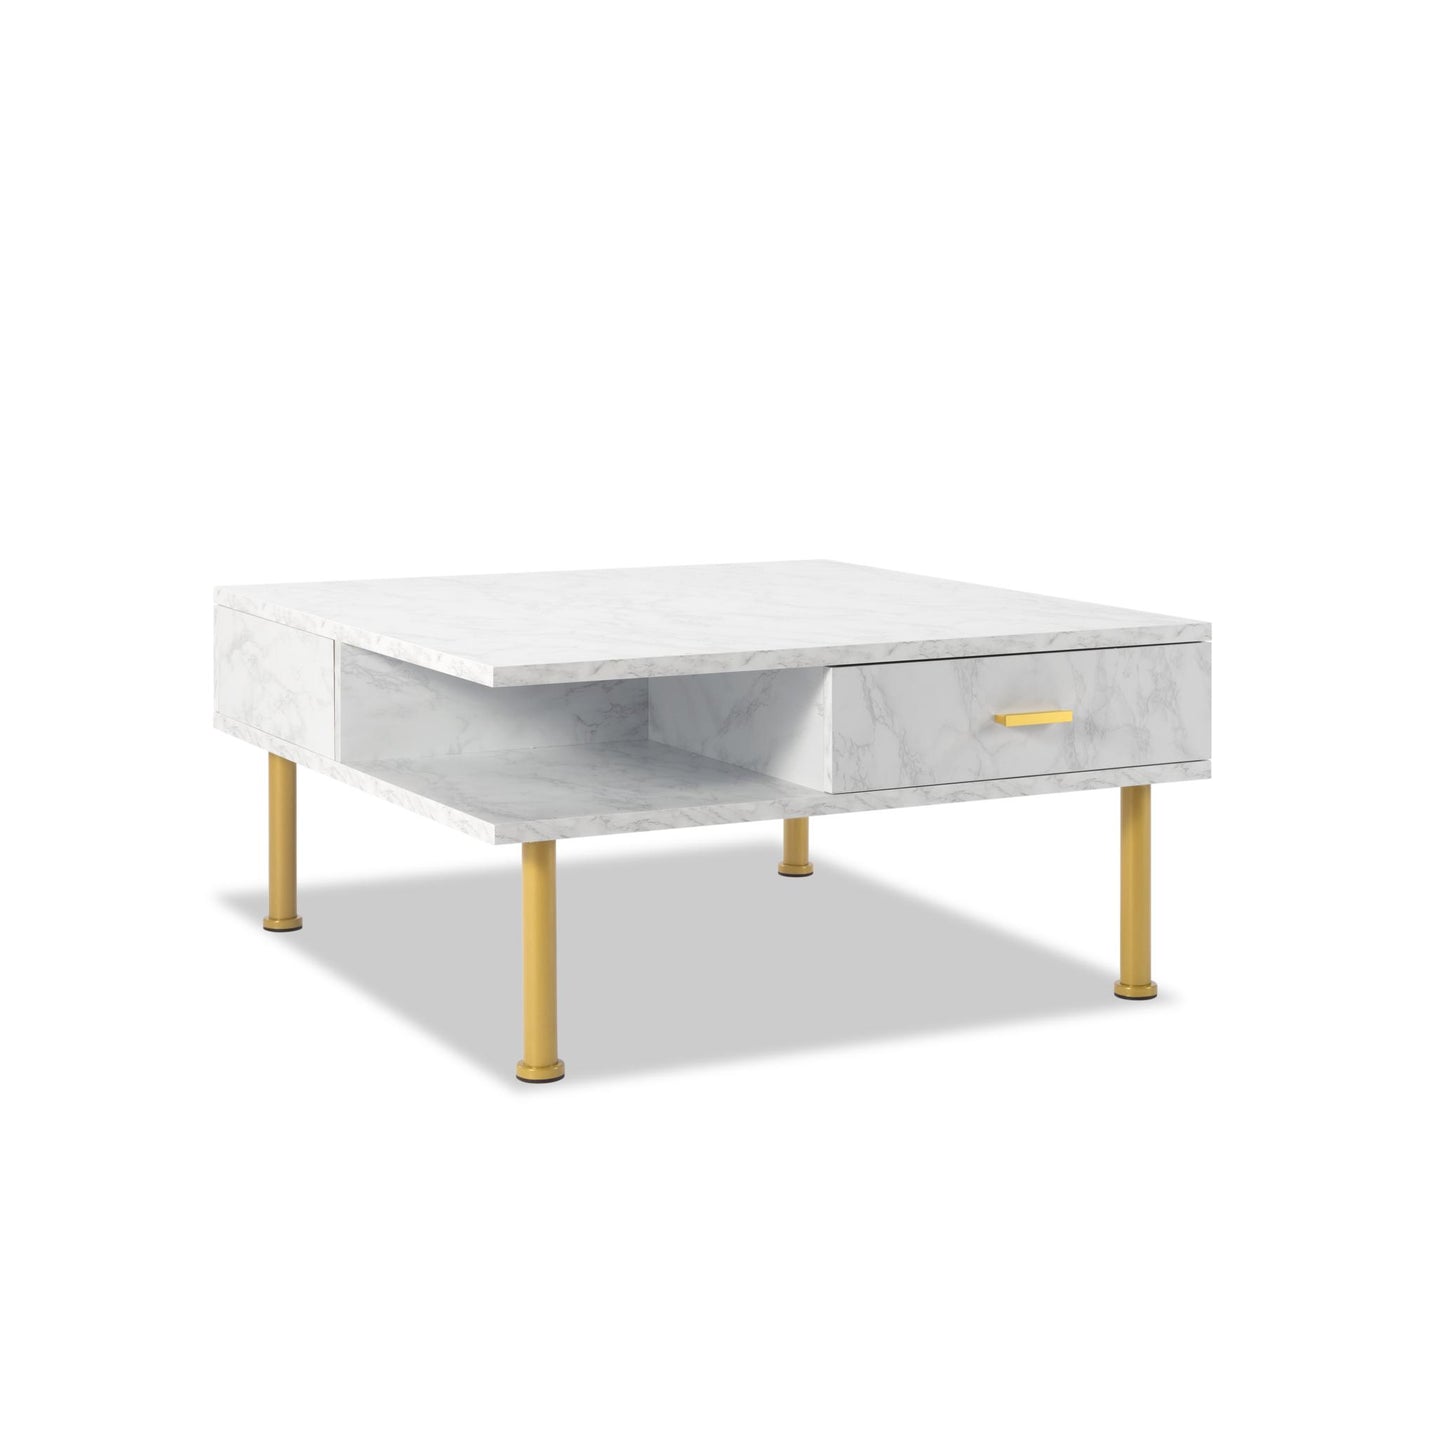 31.5” Square Coffee Table